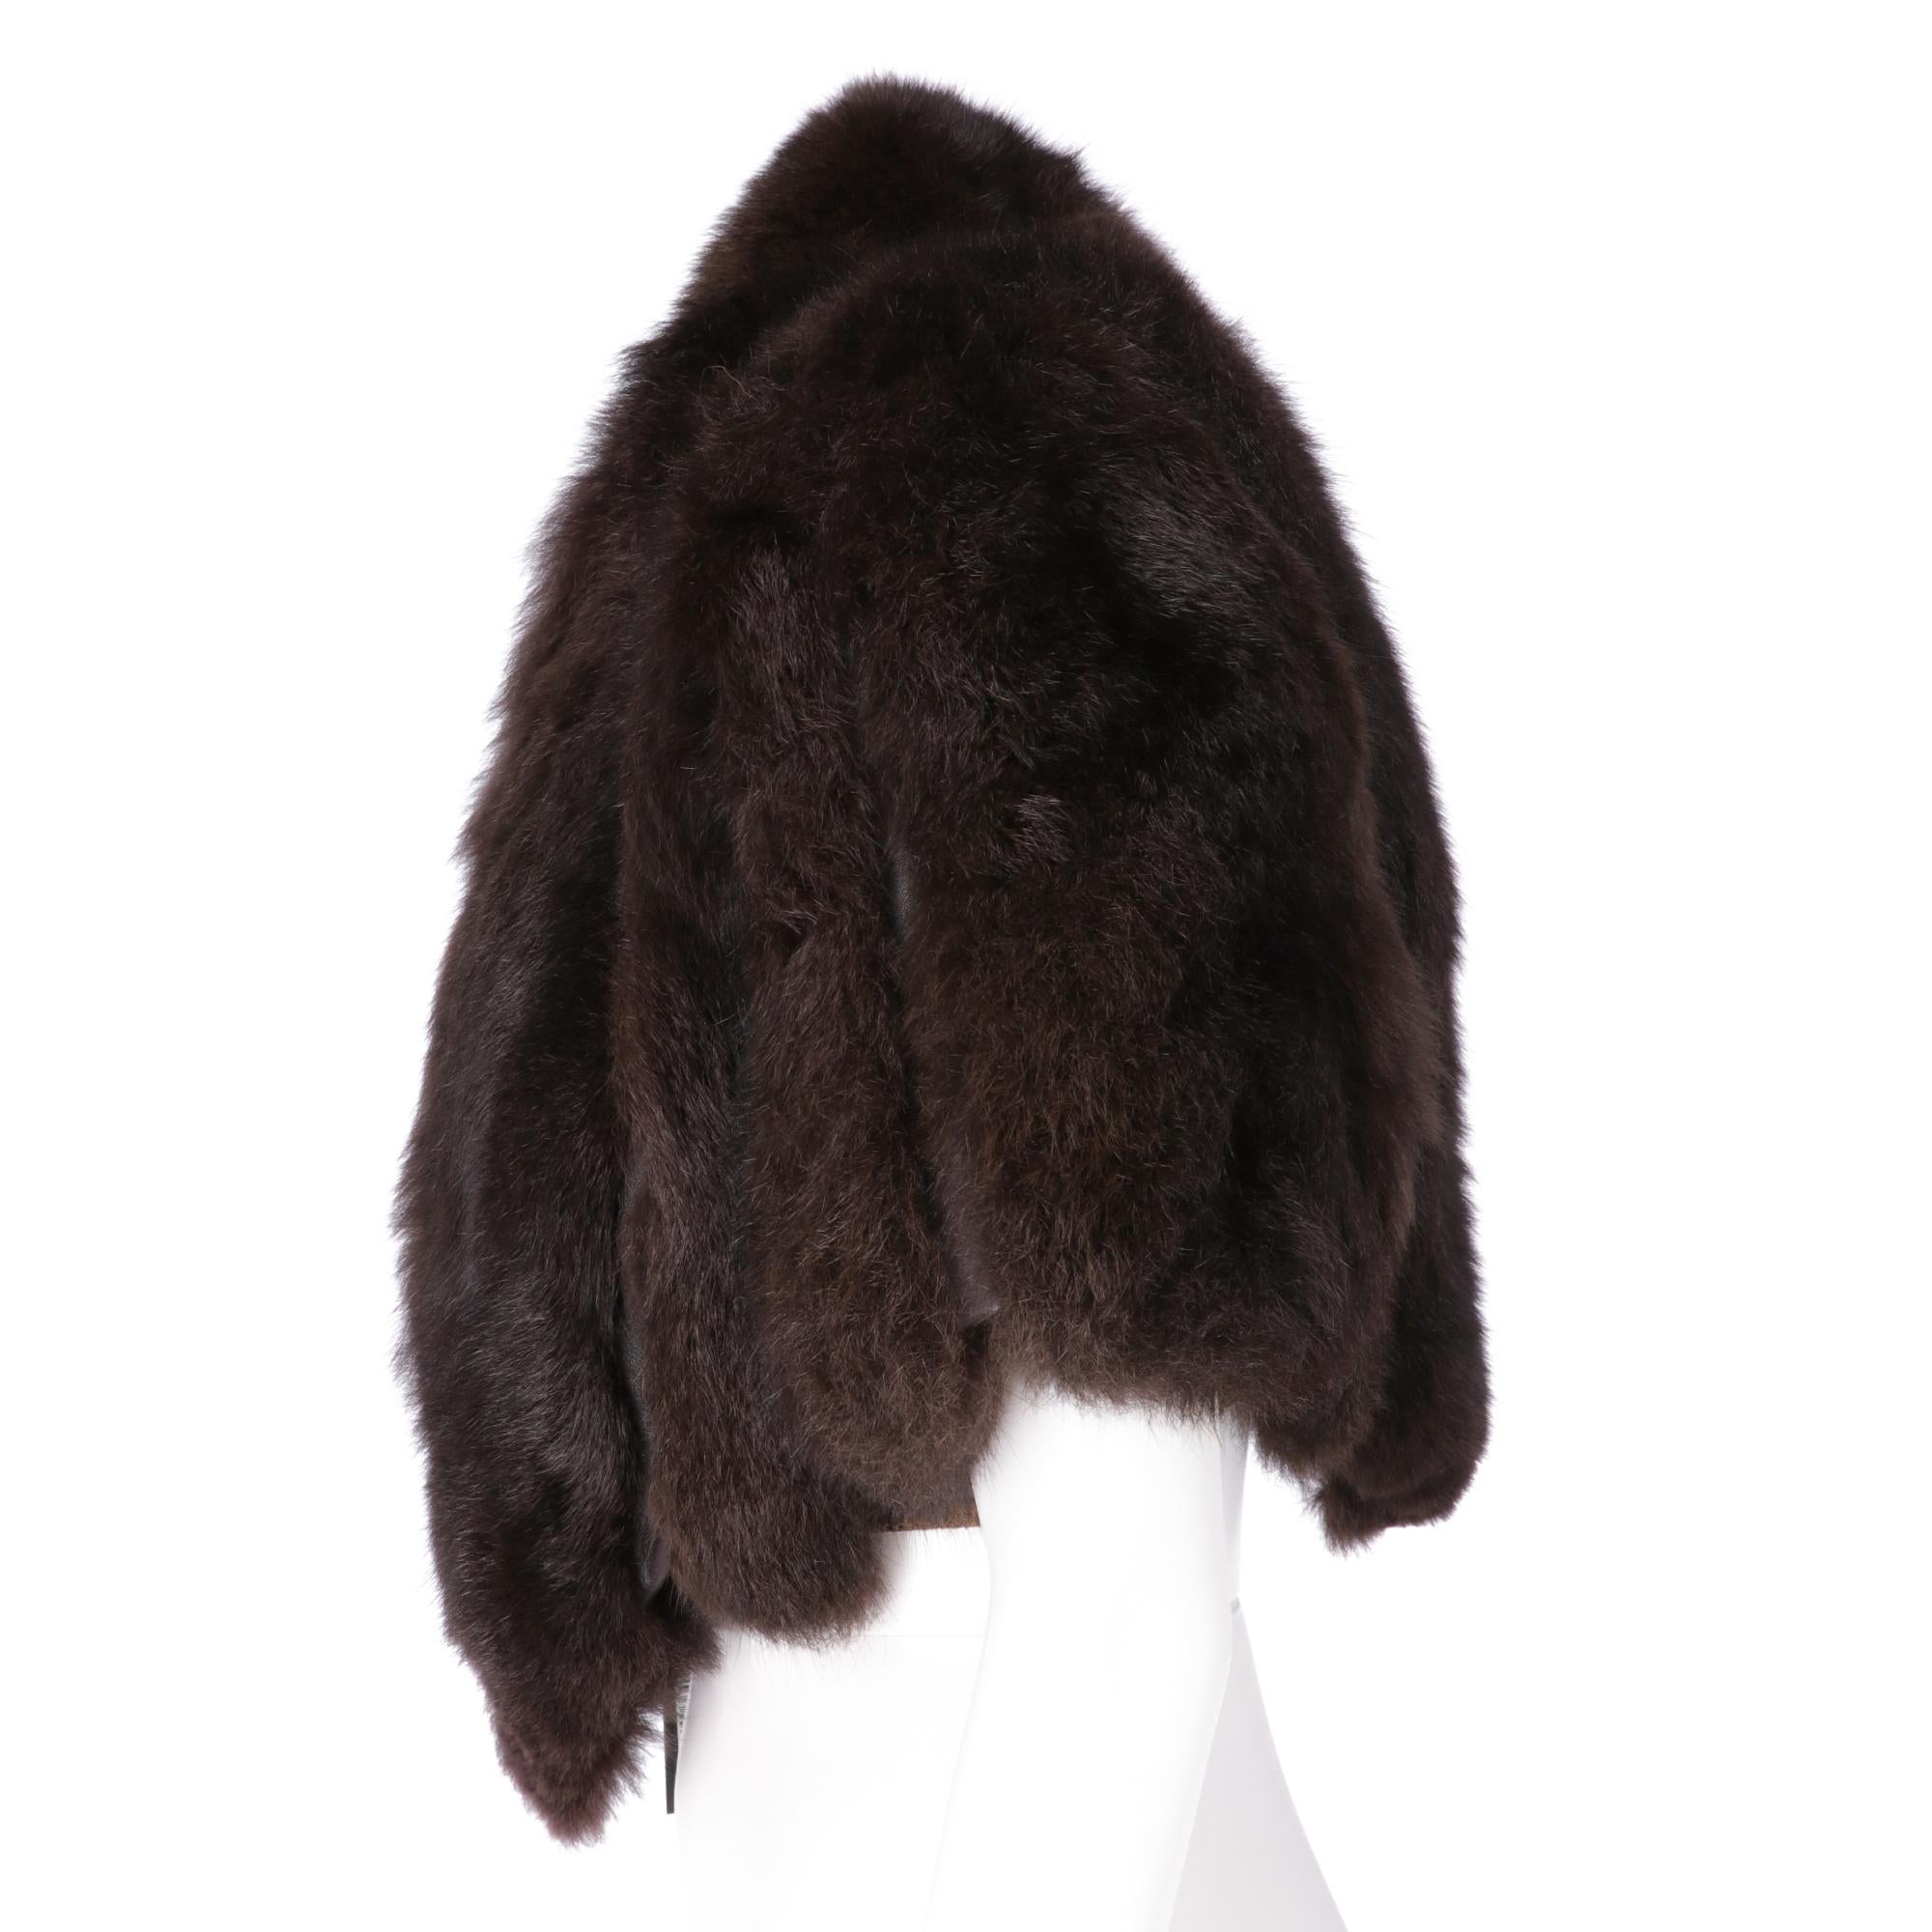 Gianfranco Ferrè real brown opossum fur short to the waist cape, with leather inserts of the same color, padded shoulders, elastic bands and hooks for the arms, lined in silk jacquard fabric, front closure with hook and chain.

This item belongs to